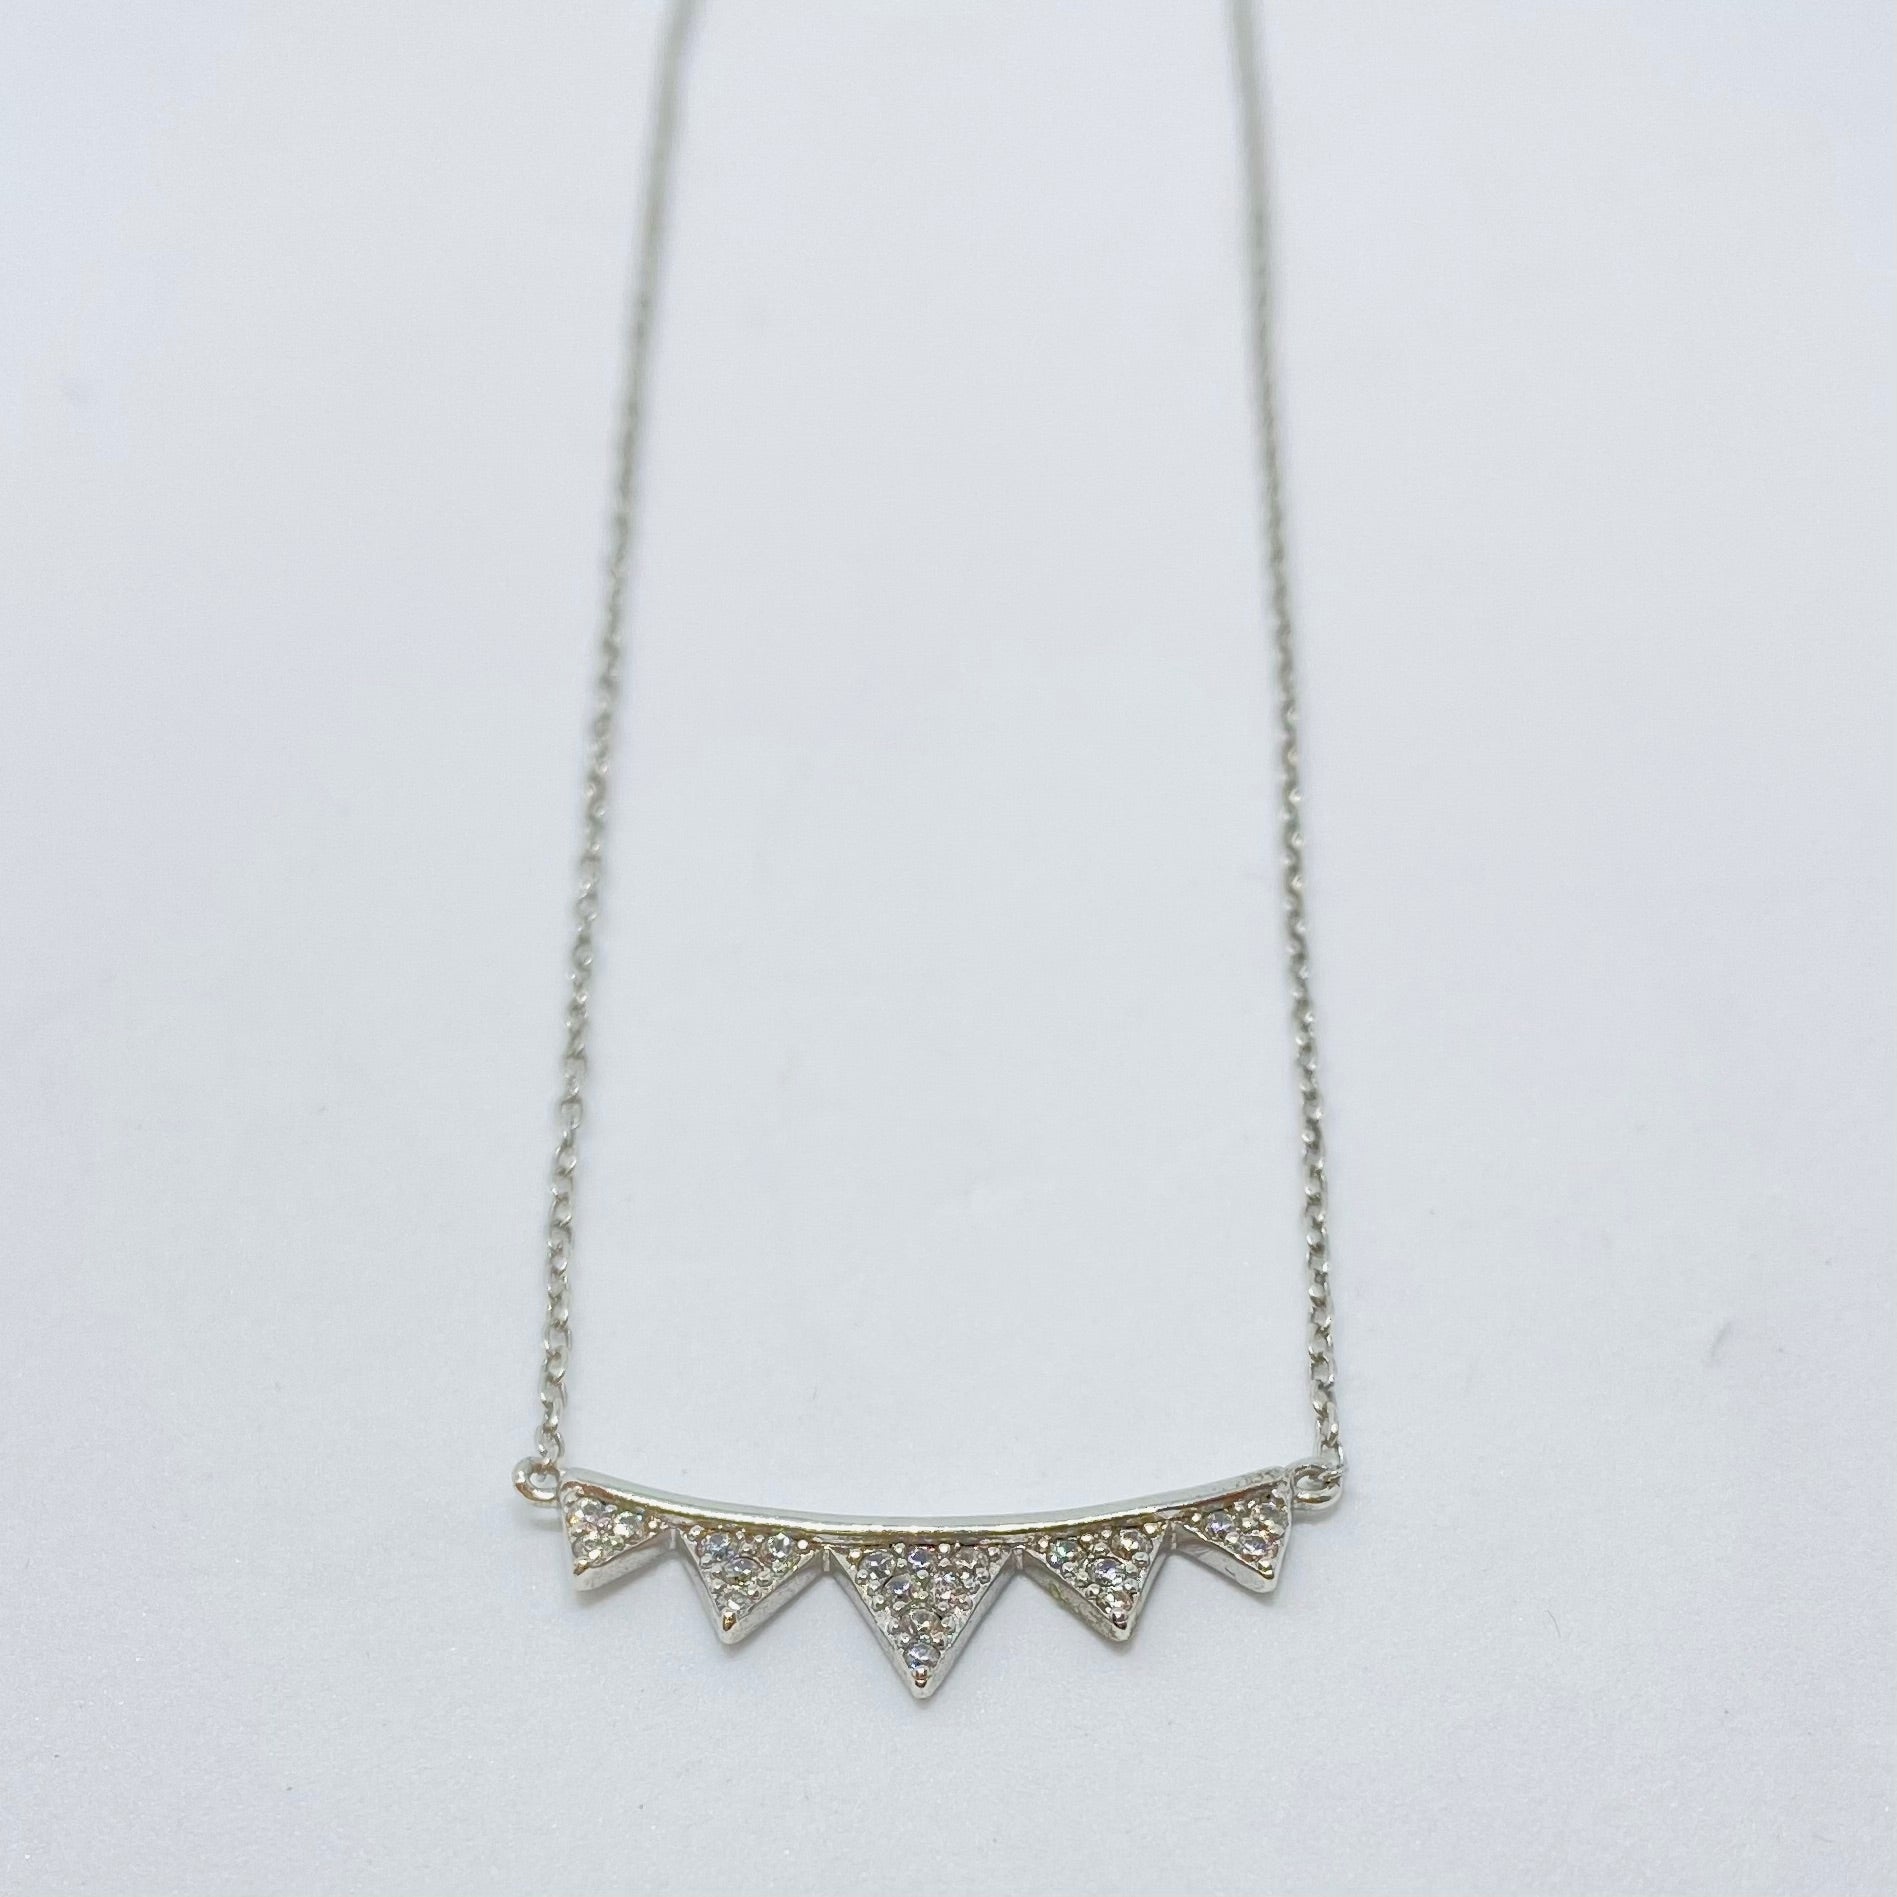 NSC - Curved bar triangle drop necklace